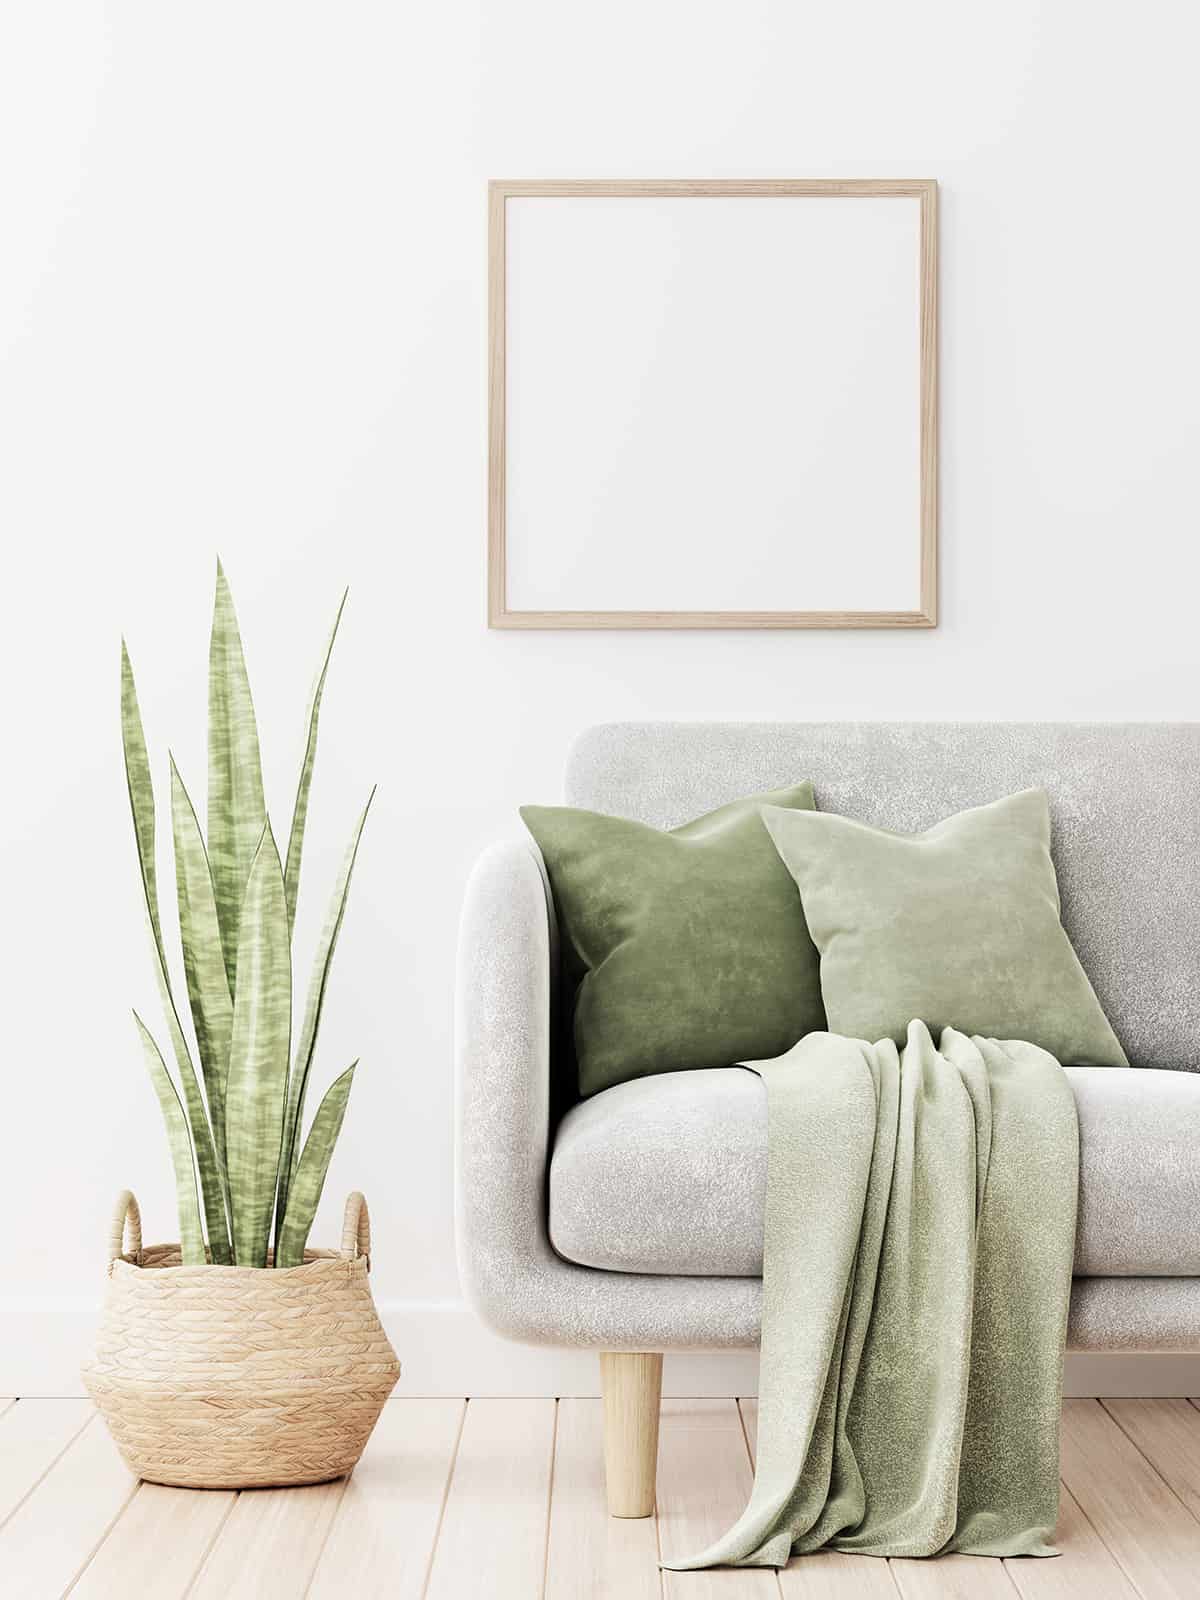 Green Throw Blanket for A Gray Couch